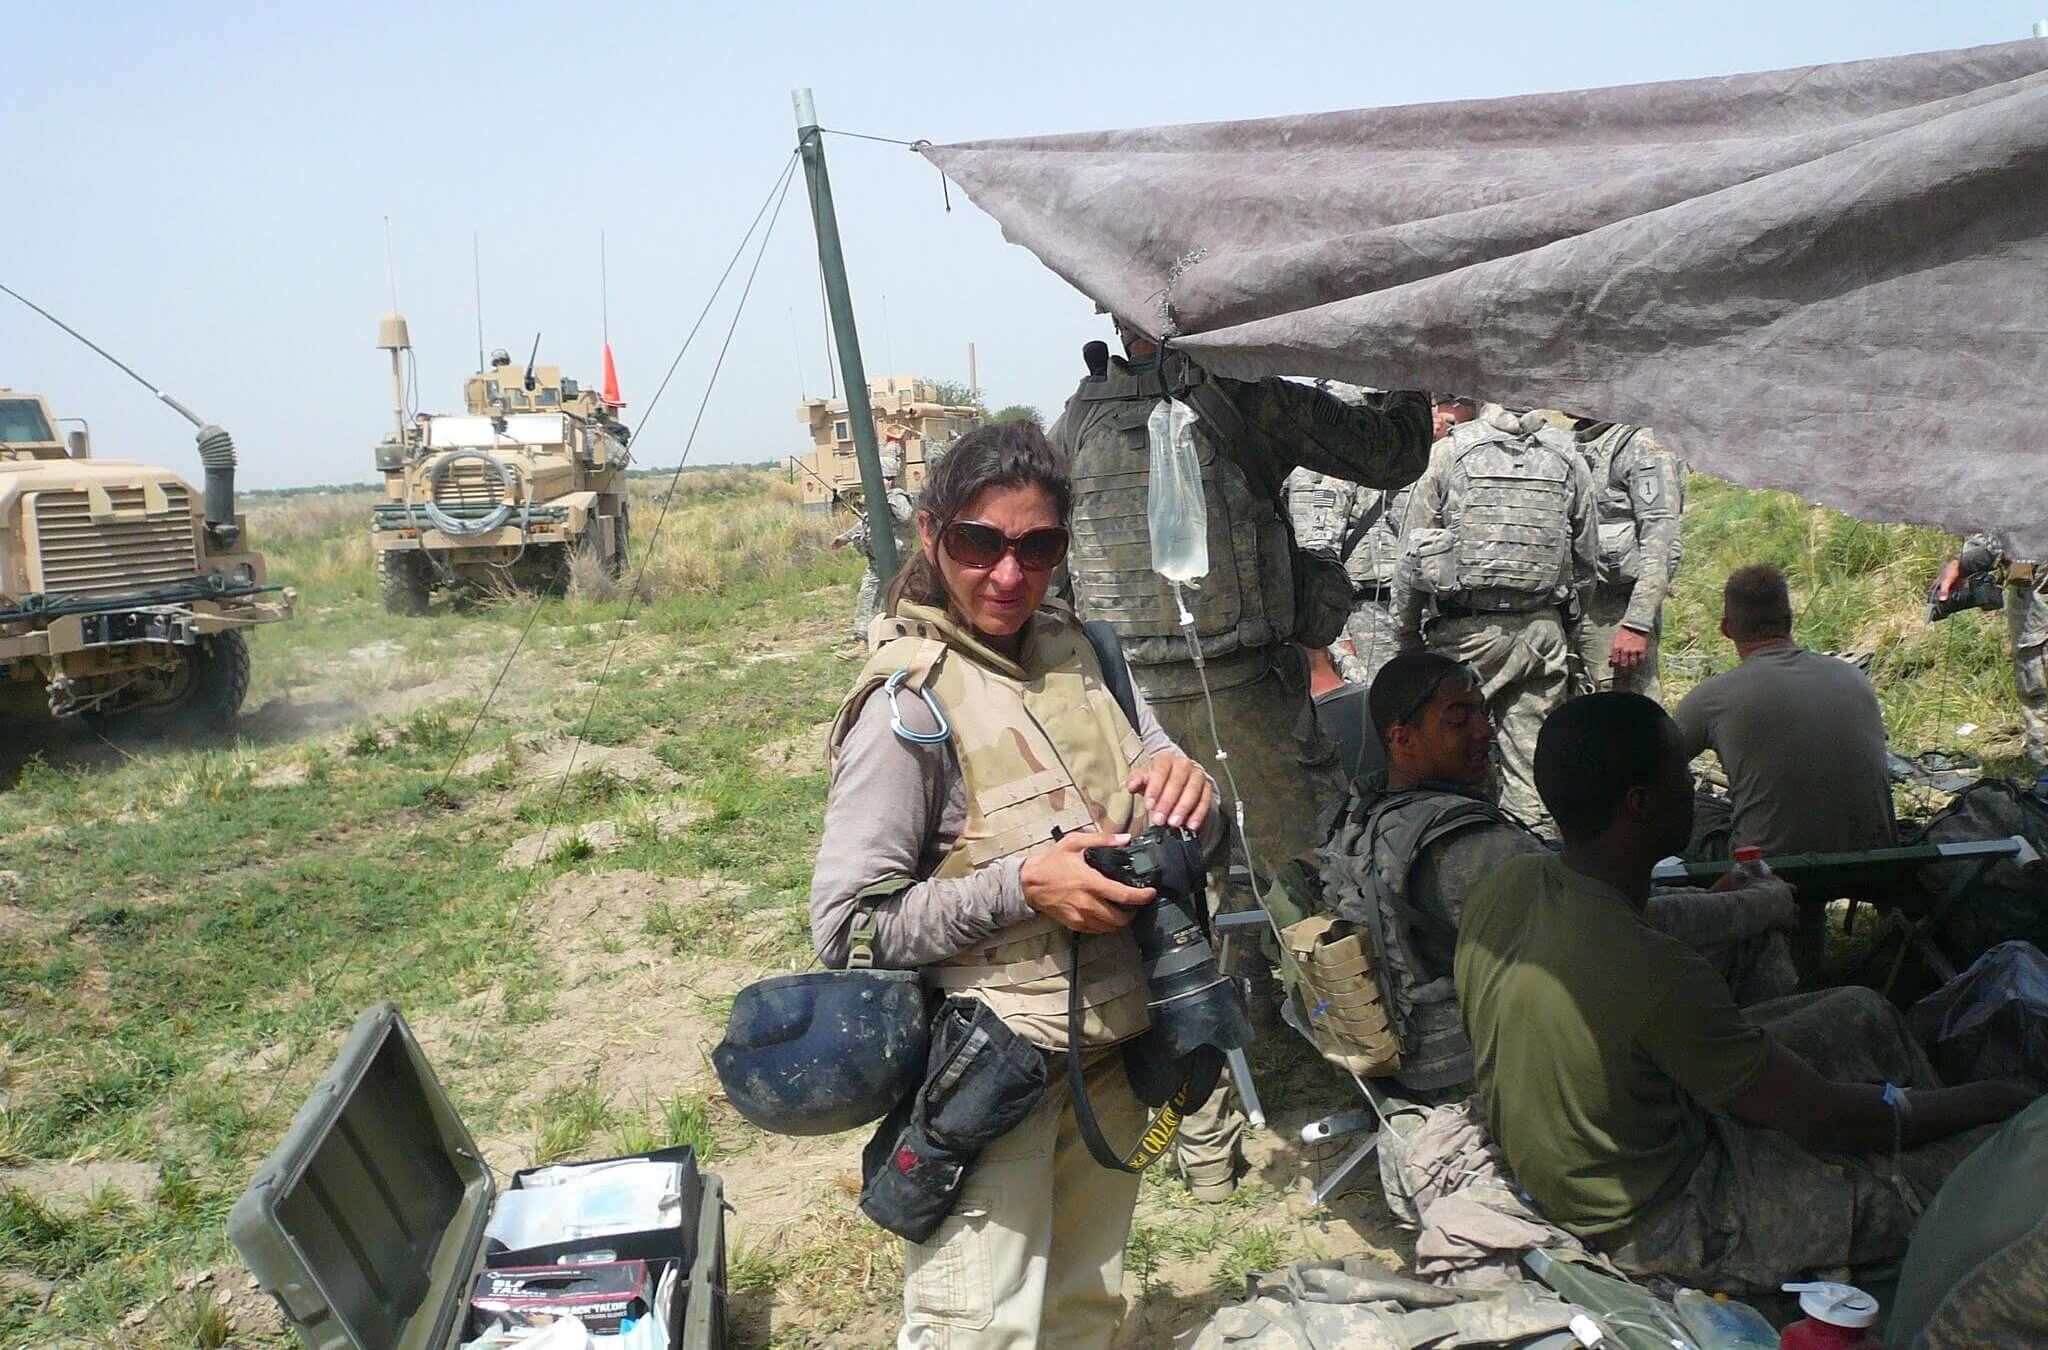 Photojournalist Lynsey Addario during an embed with the U.S. Marines in Helmand province, Afghanistan, April 2009.